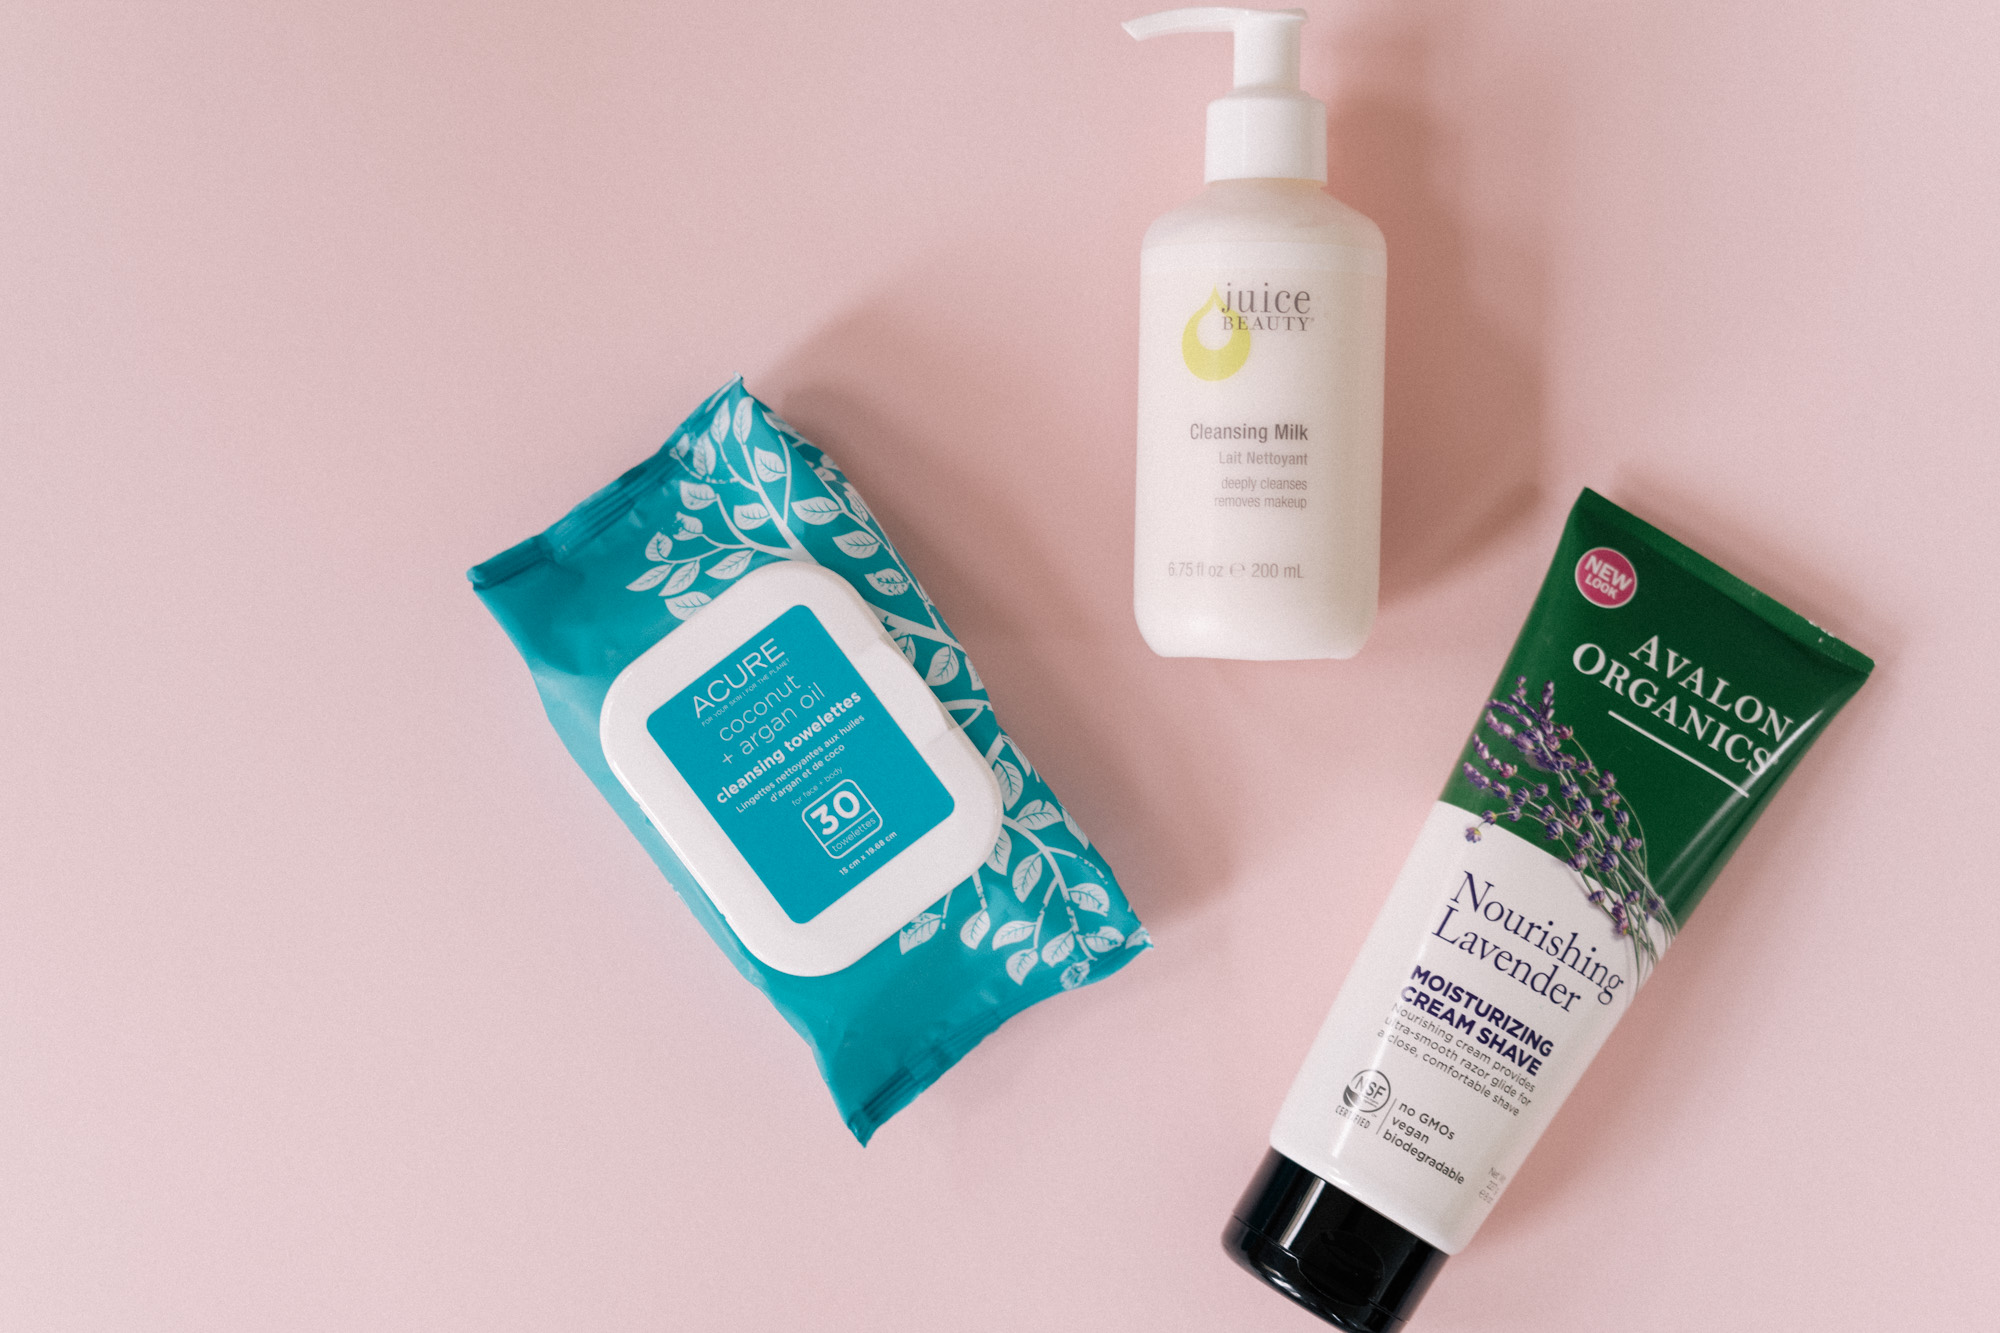 These Are The 10 Beauty Products I Buy From Whole Foods - Julia Berolzheimer